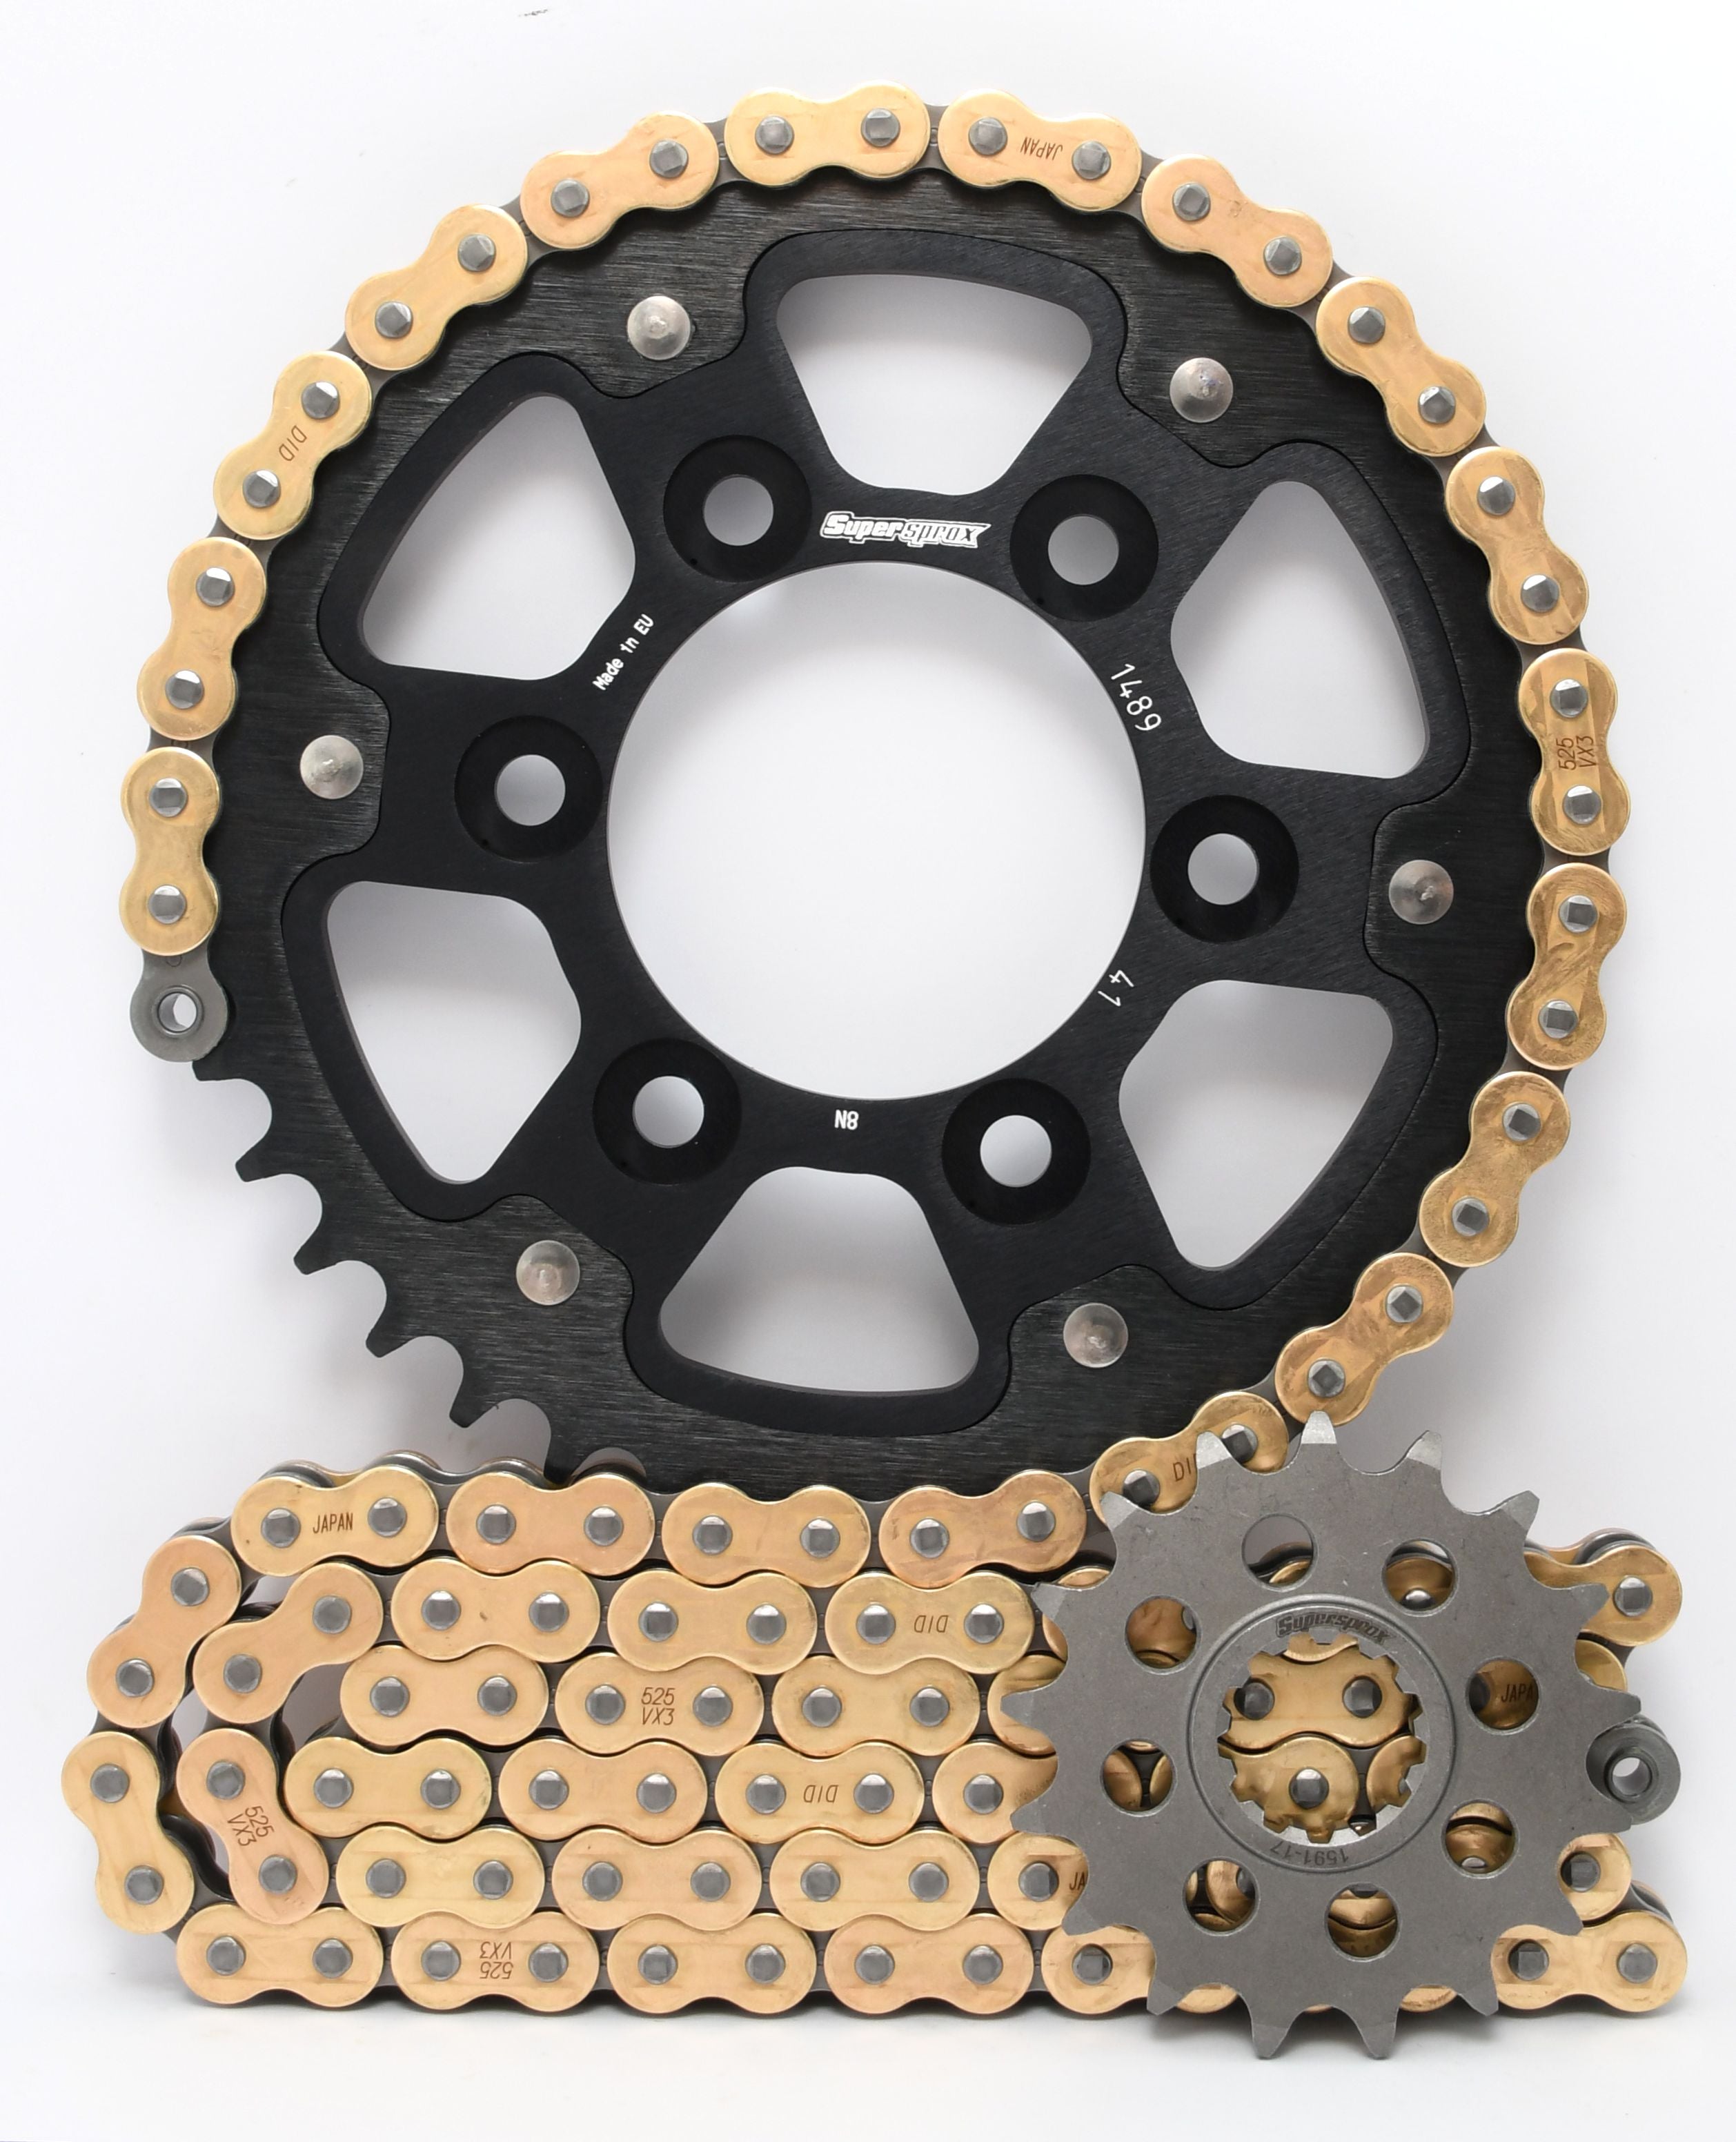 Supersprox Chain & Sprocket Kit for Kawasaki ZX7R 96-03 - Choose Your Gearing